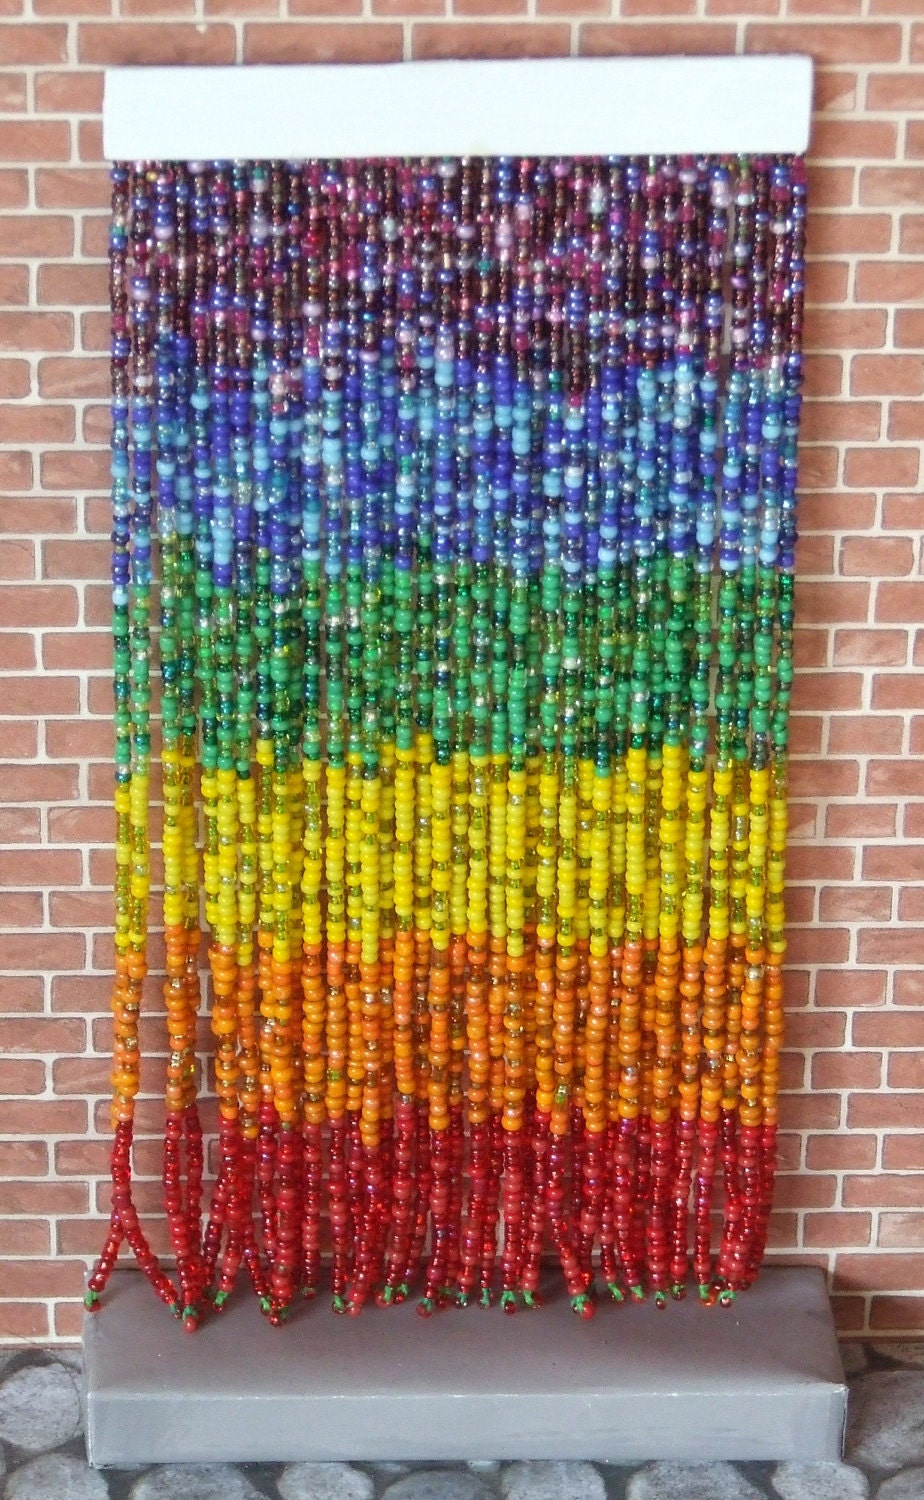 1/12th Scale Beaded Curtain for Dolls House Doorways - AndrewsBeads